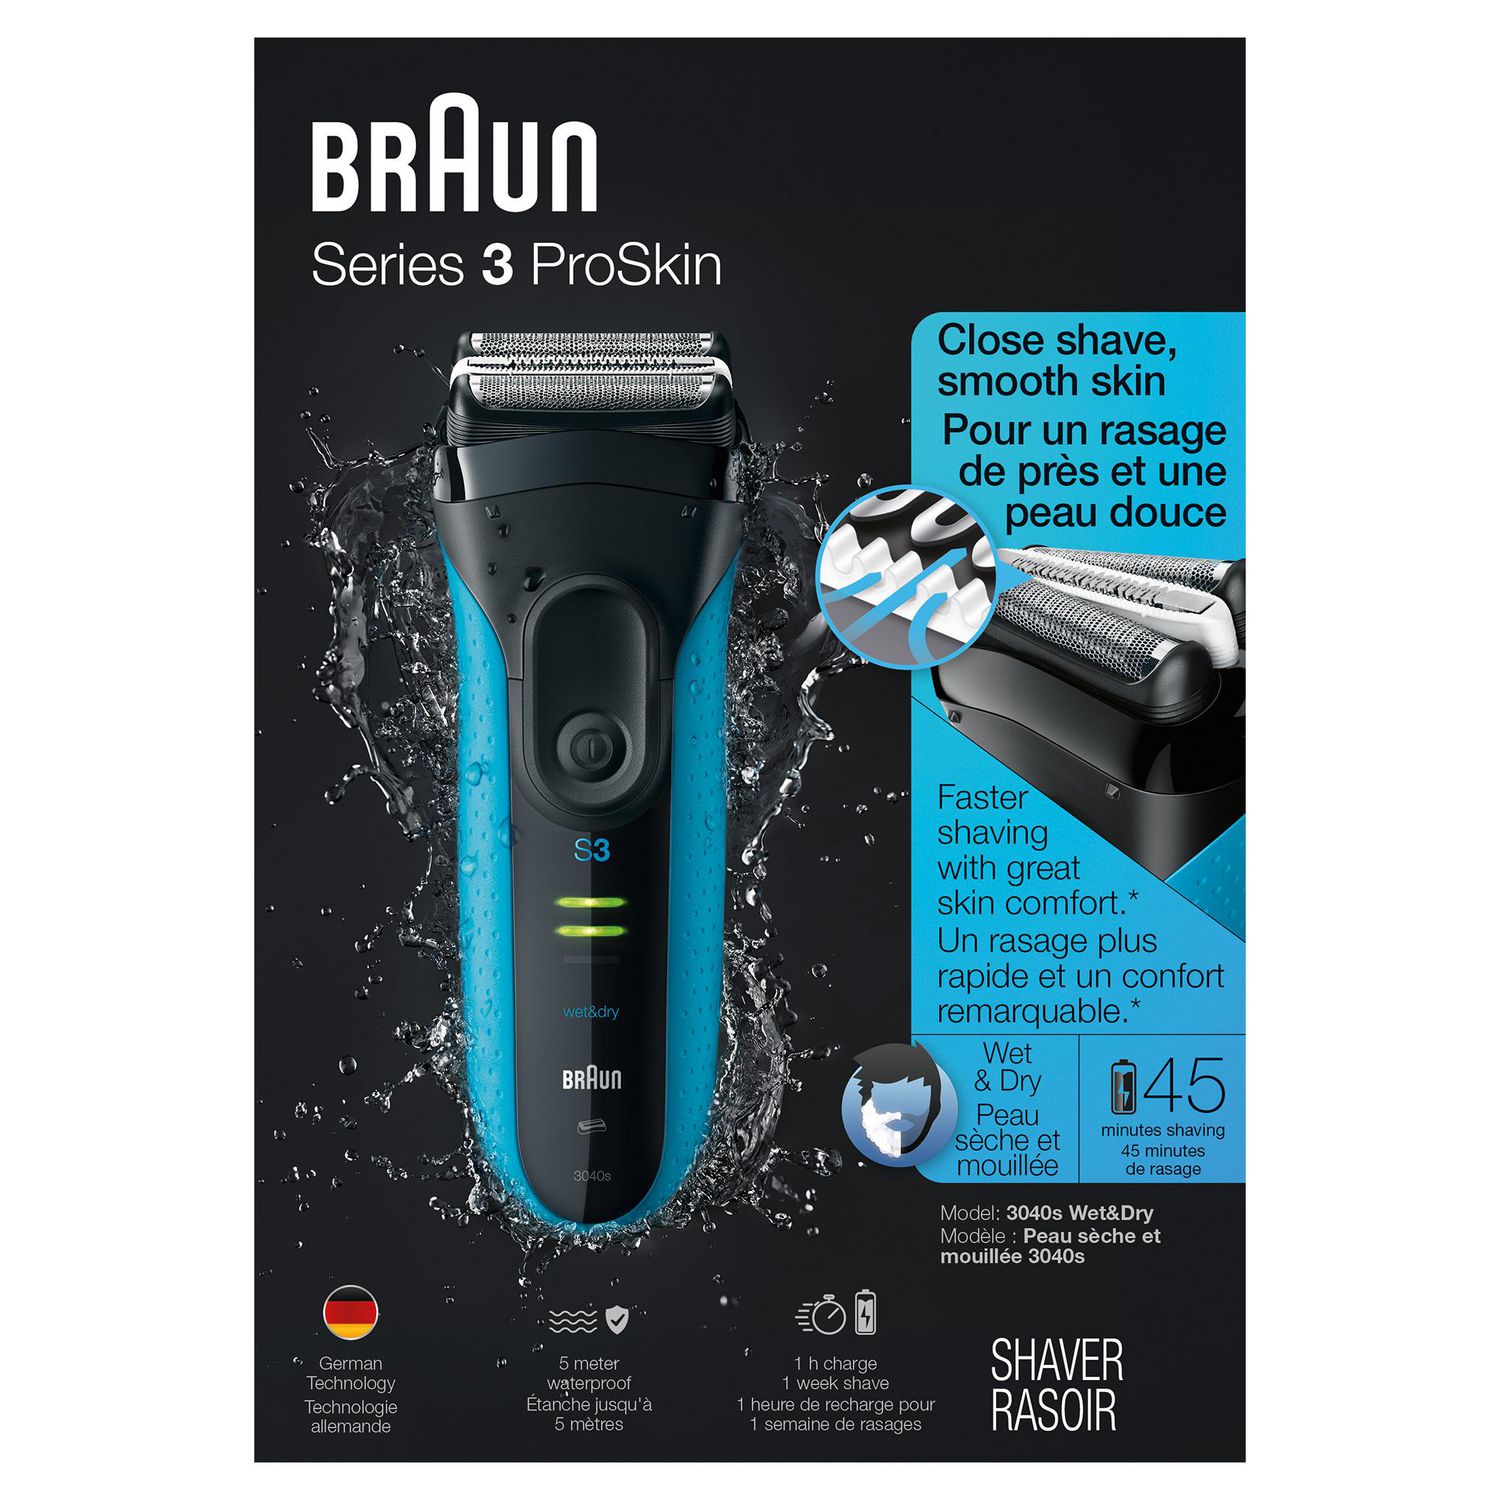 Braun Series 3 Electric Set Black/Blue, Proskin 3-in-1 Men, for and Dry Razor Shaver, Wet Shave&Style 1